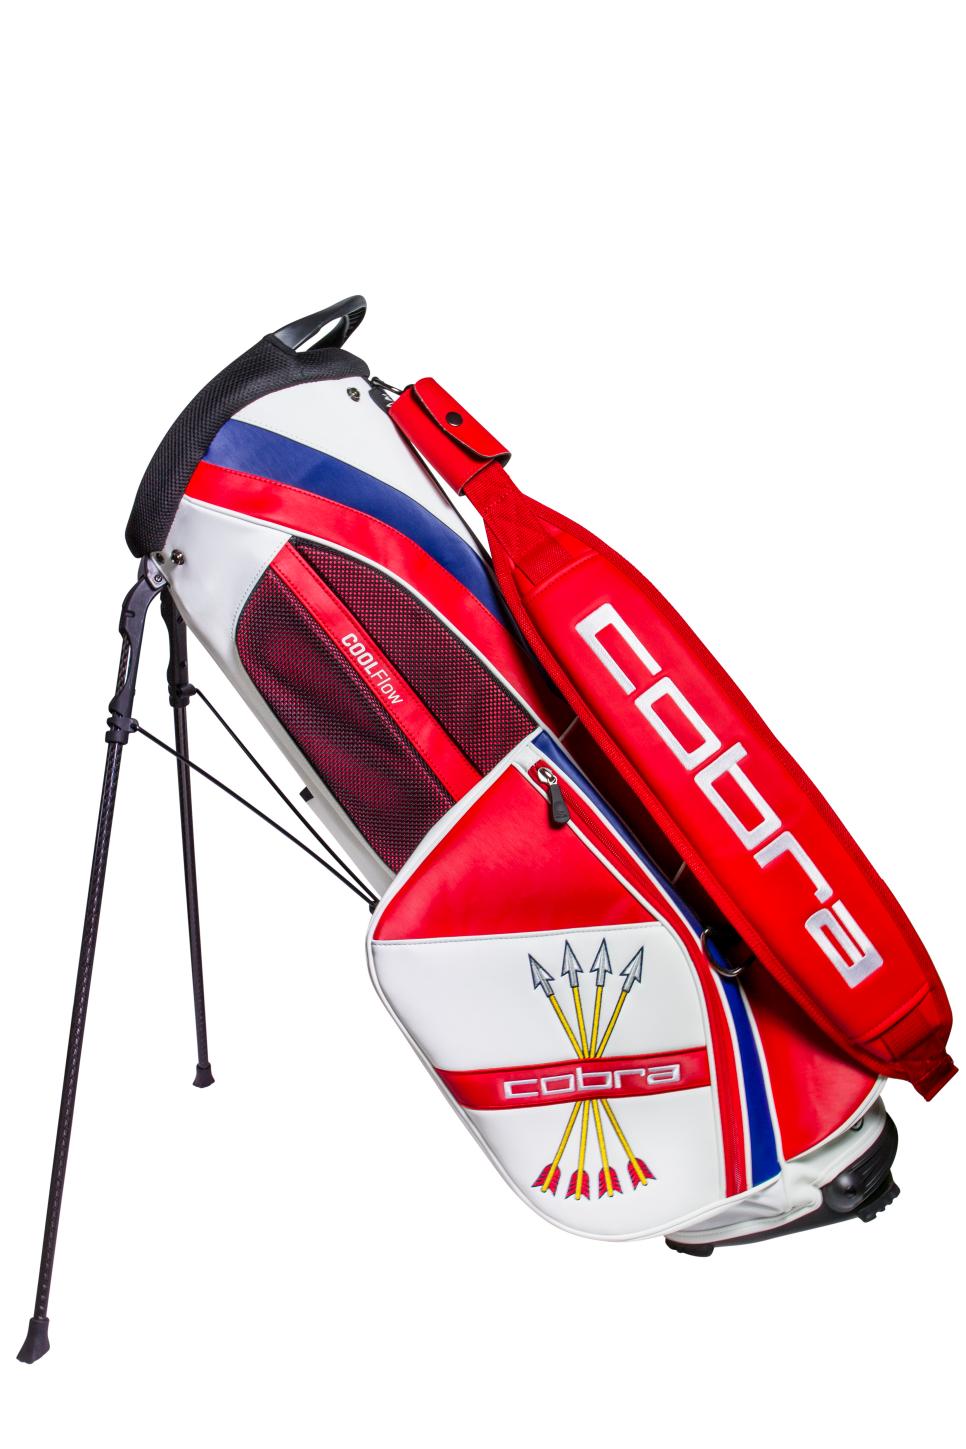 18SS_DIGITAL_GO_Accessories_Majors_Image_3456x5184px_US-Open-Stand-Bag-4.jpg